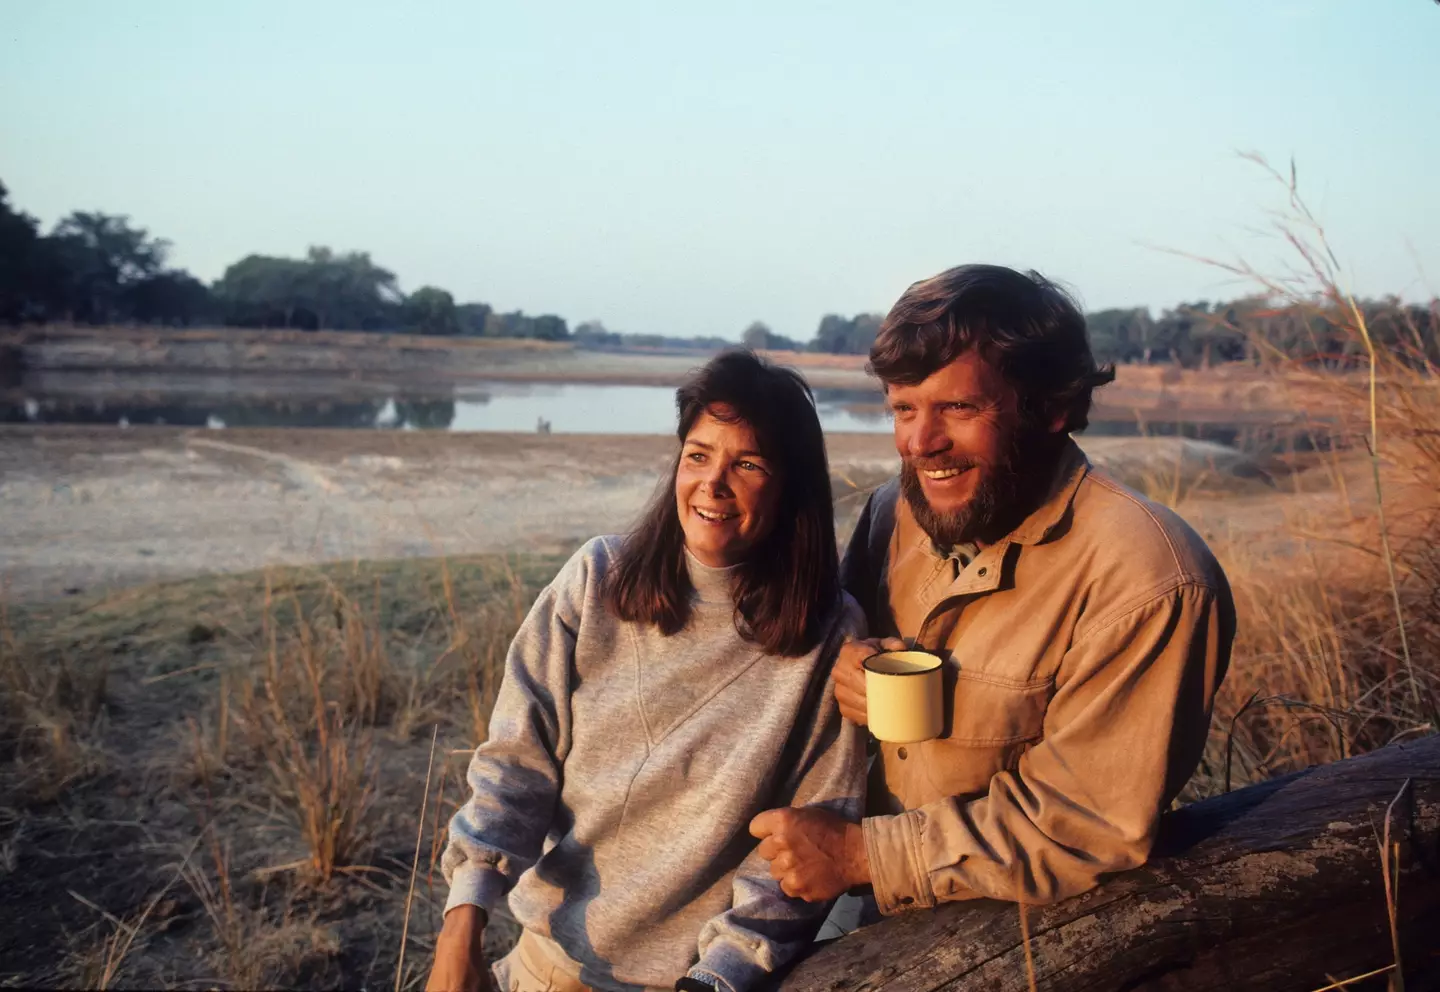 Mark and Delia Owens pictured in Zambia in 1990. (William Campbell/Corbis via Getty Images)